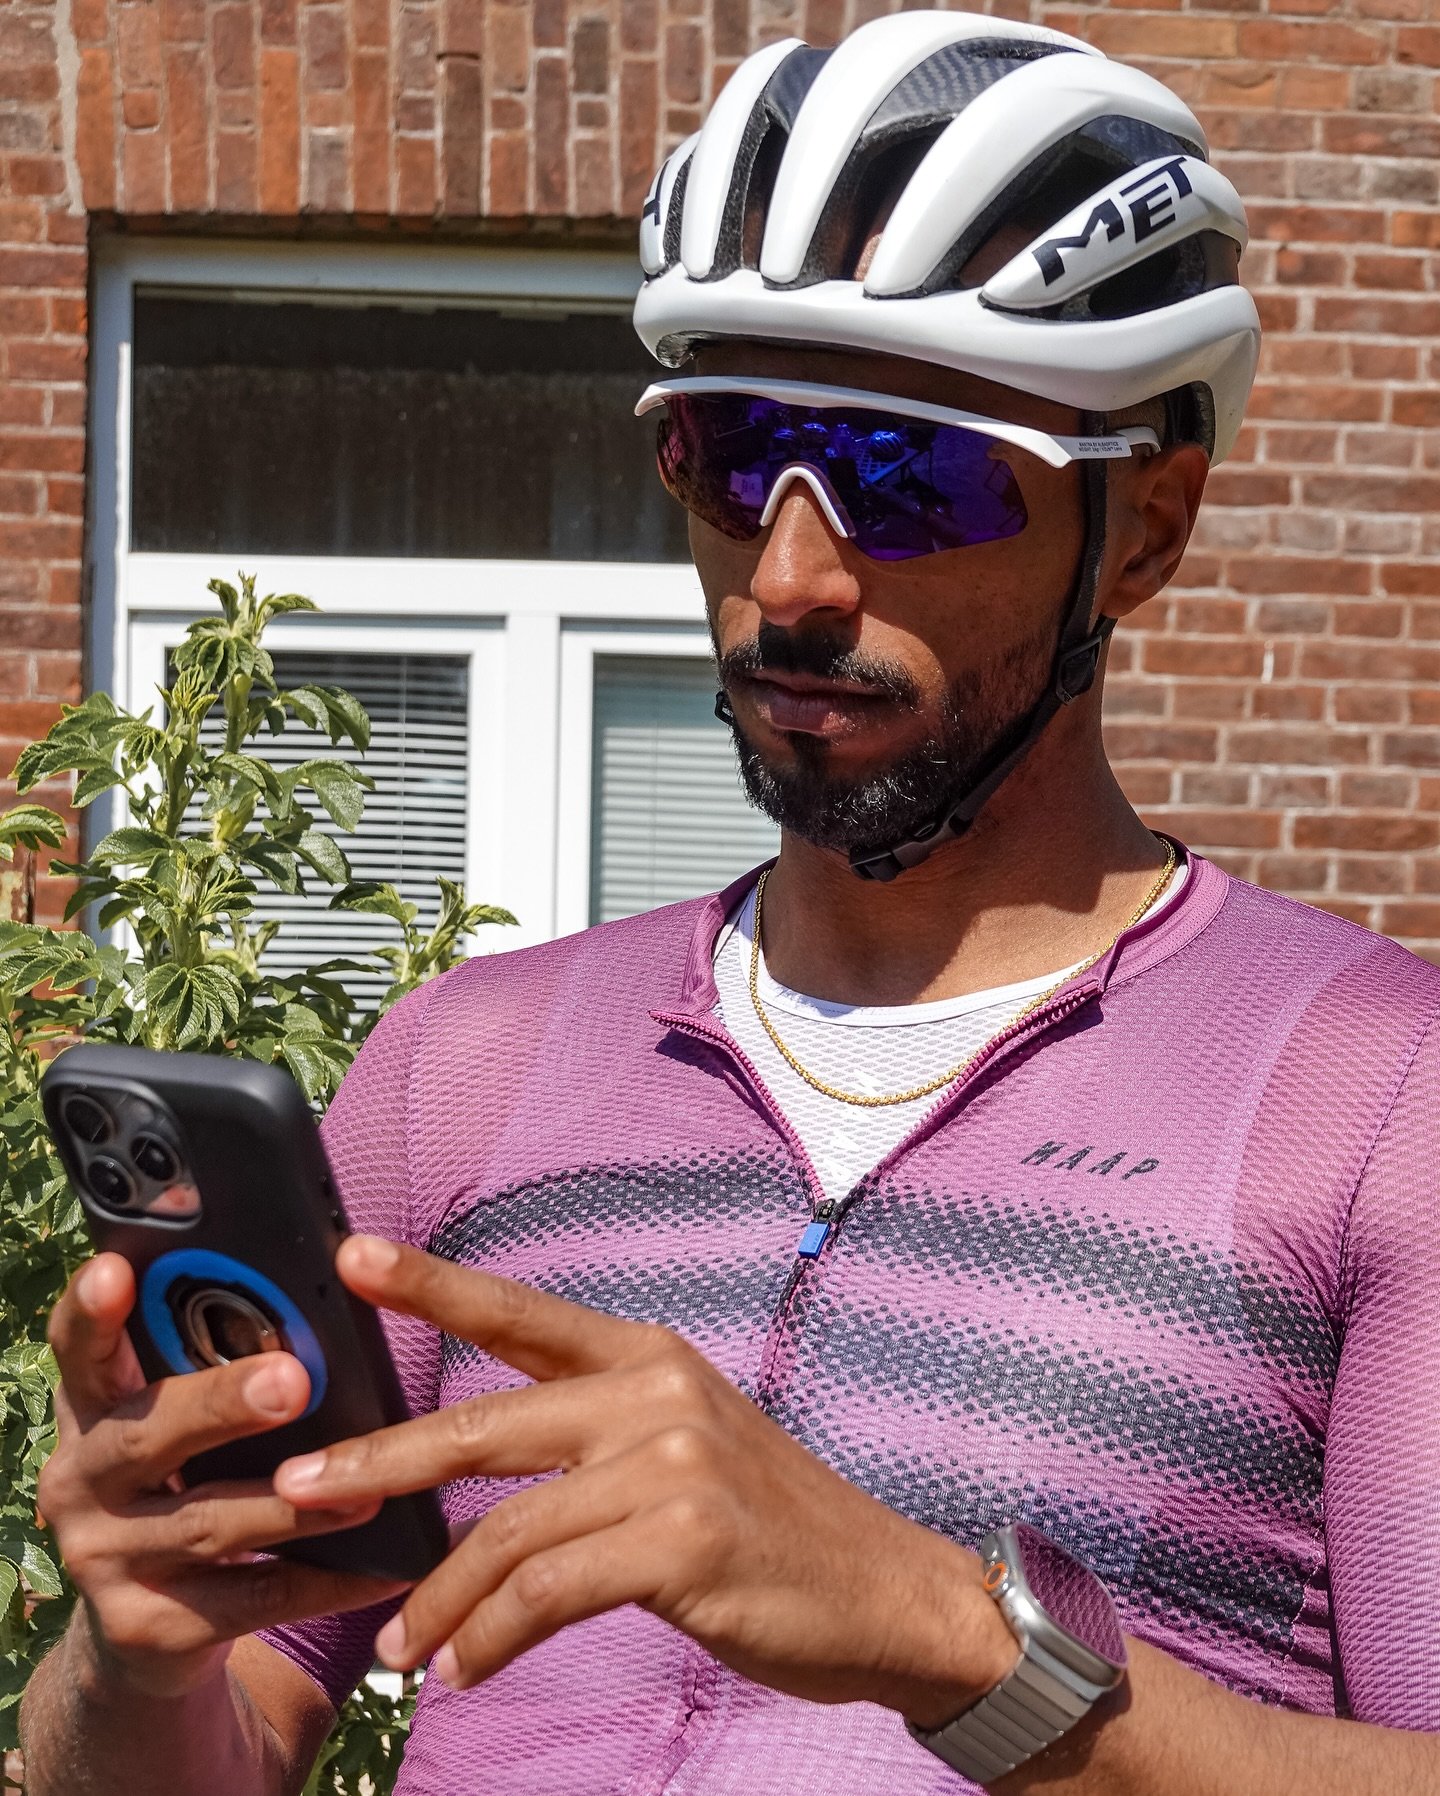 Still searching - scrolling - for meaning in the chaos 🔍

#cyclist #cyclinglife #influencerlife #socialmedia #cyclingkit #maap #albaoptics #quadlock